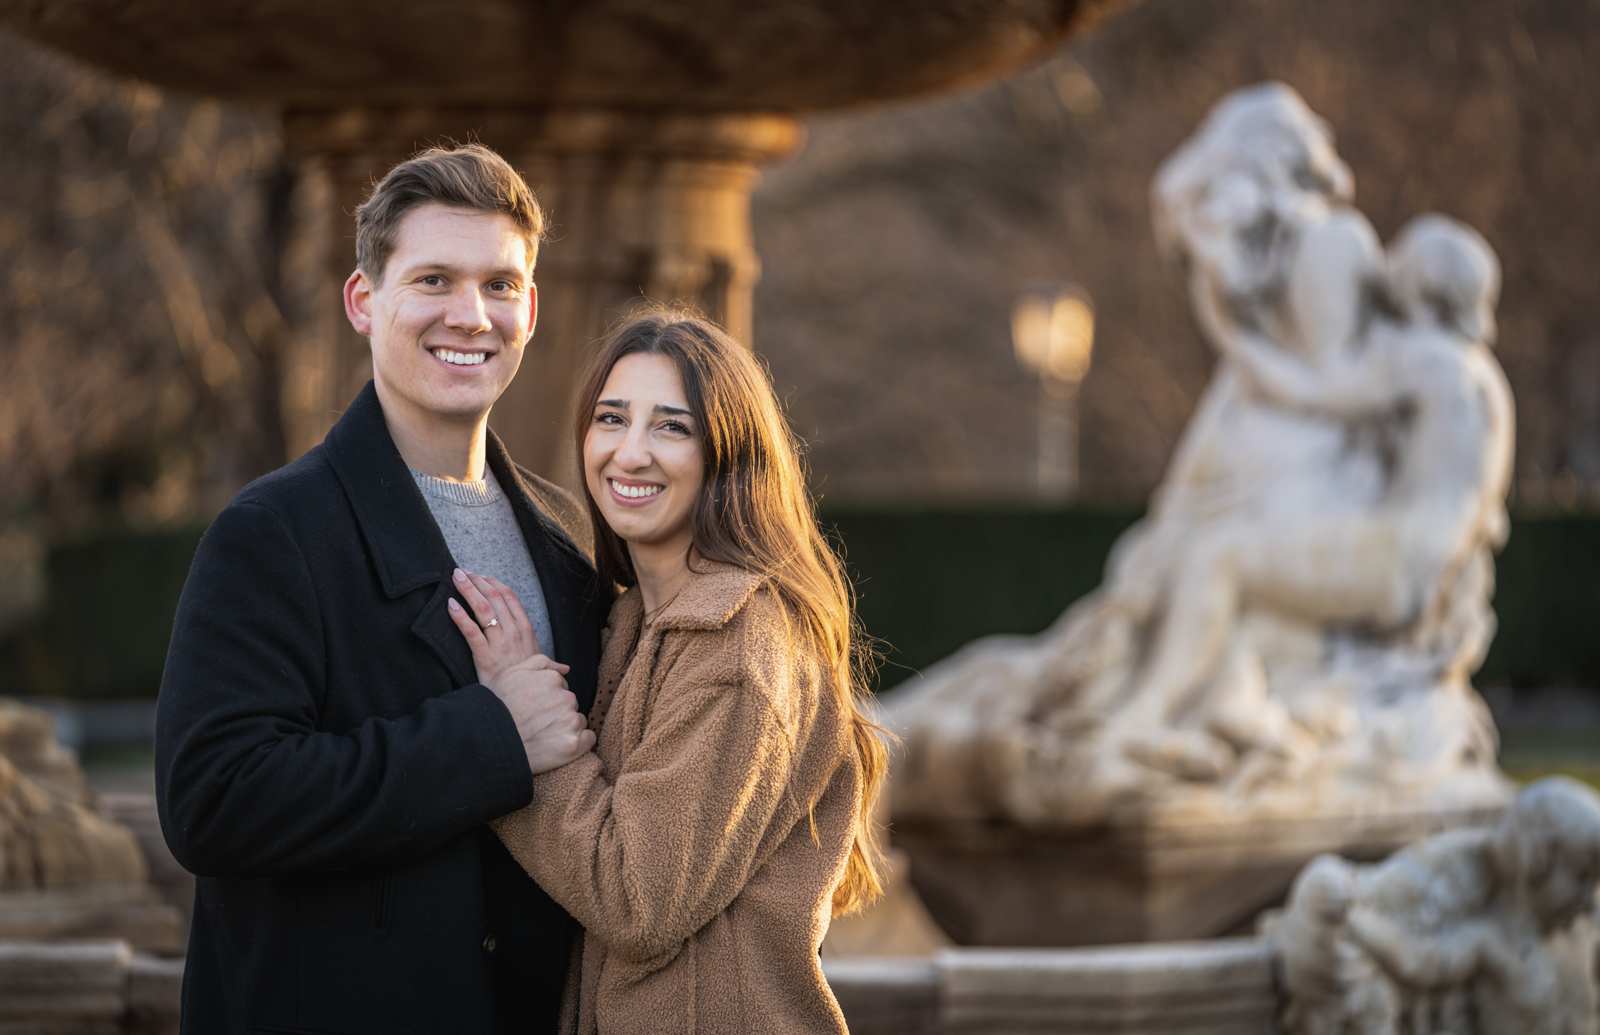 Olivia and Chris’ Engagement Session at the Cleveland Art Museum